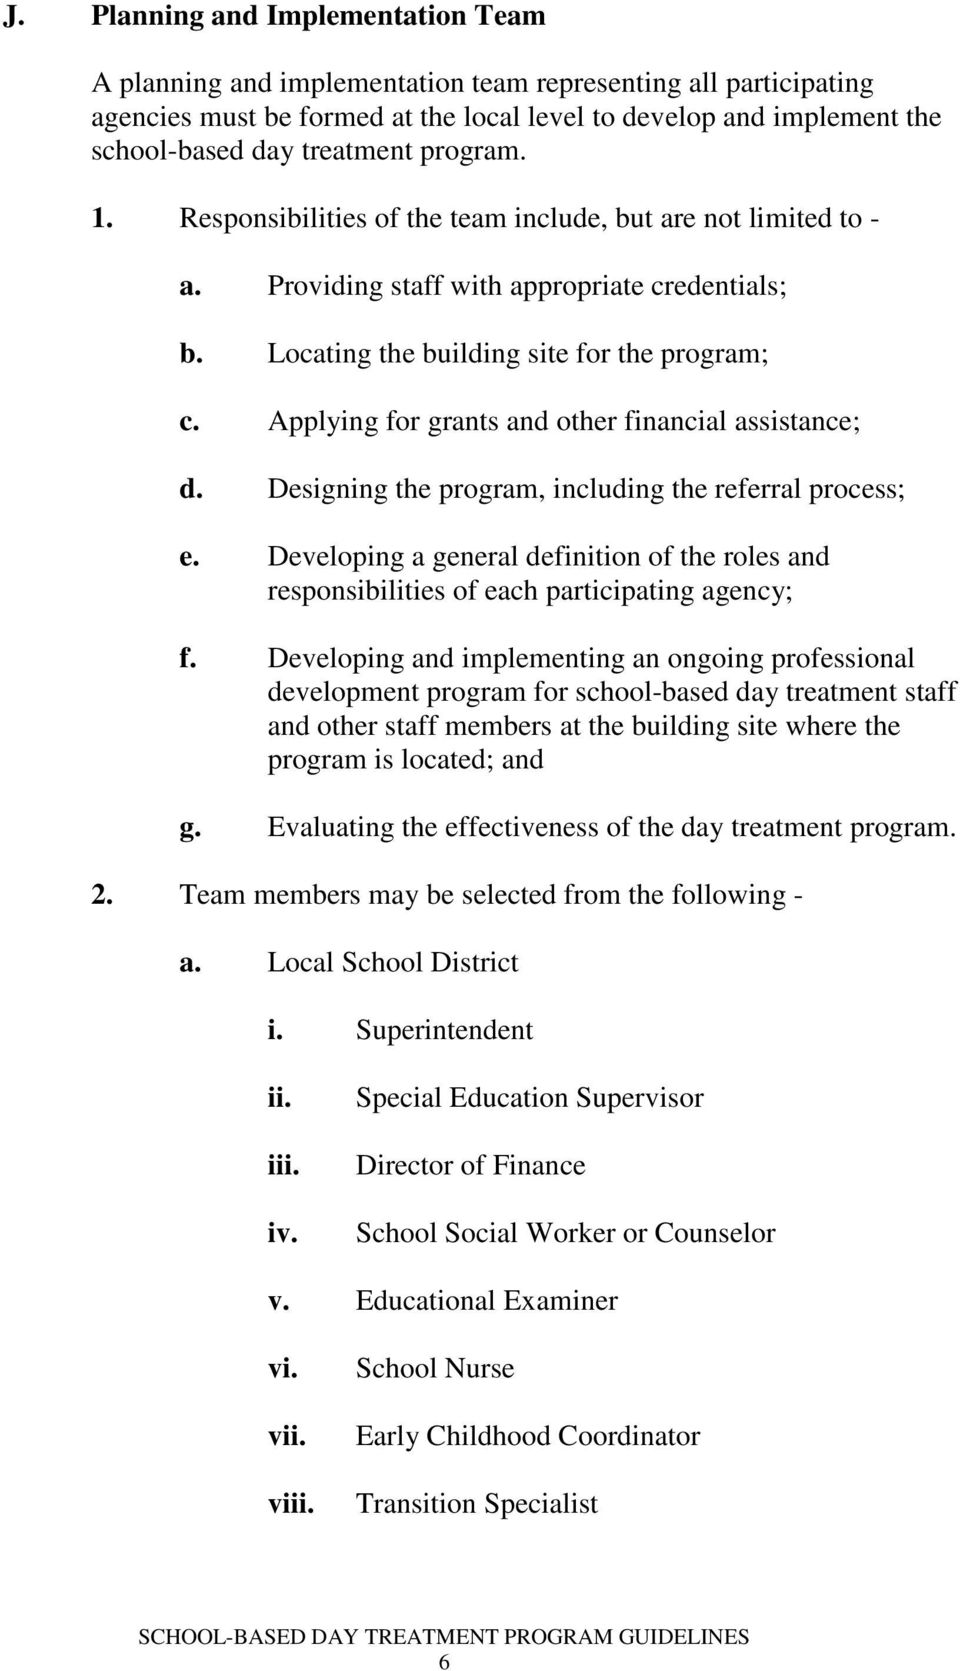 Applying for grants and other financial assistance; d. Designing the program, including the referral process; e.